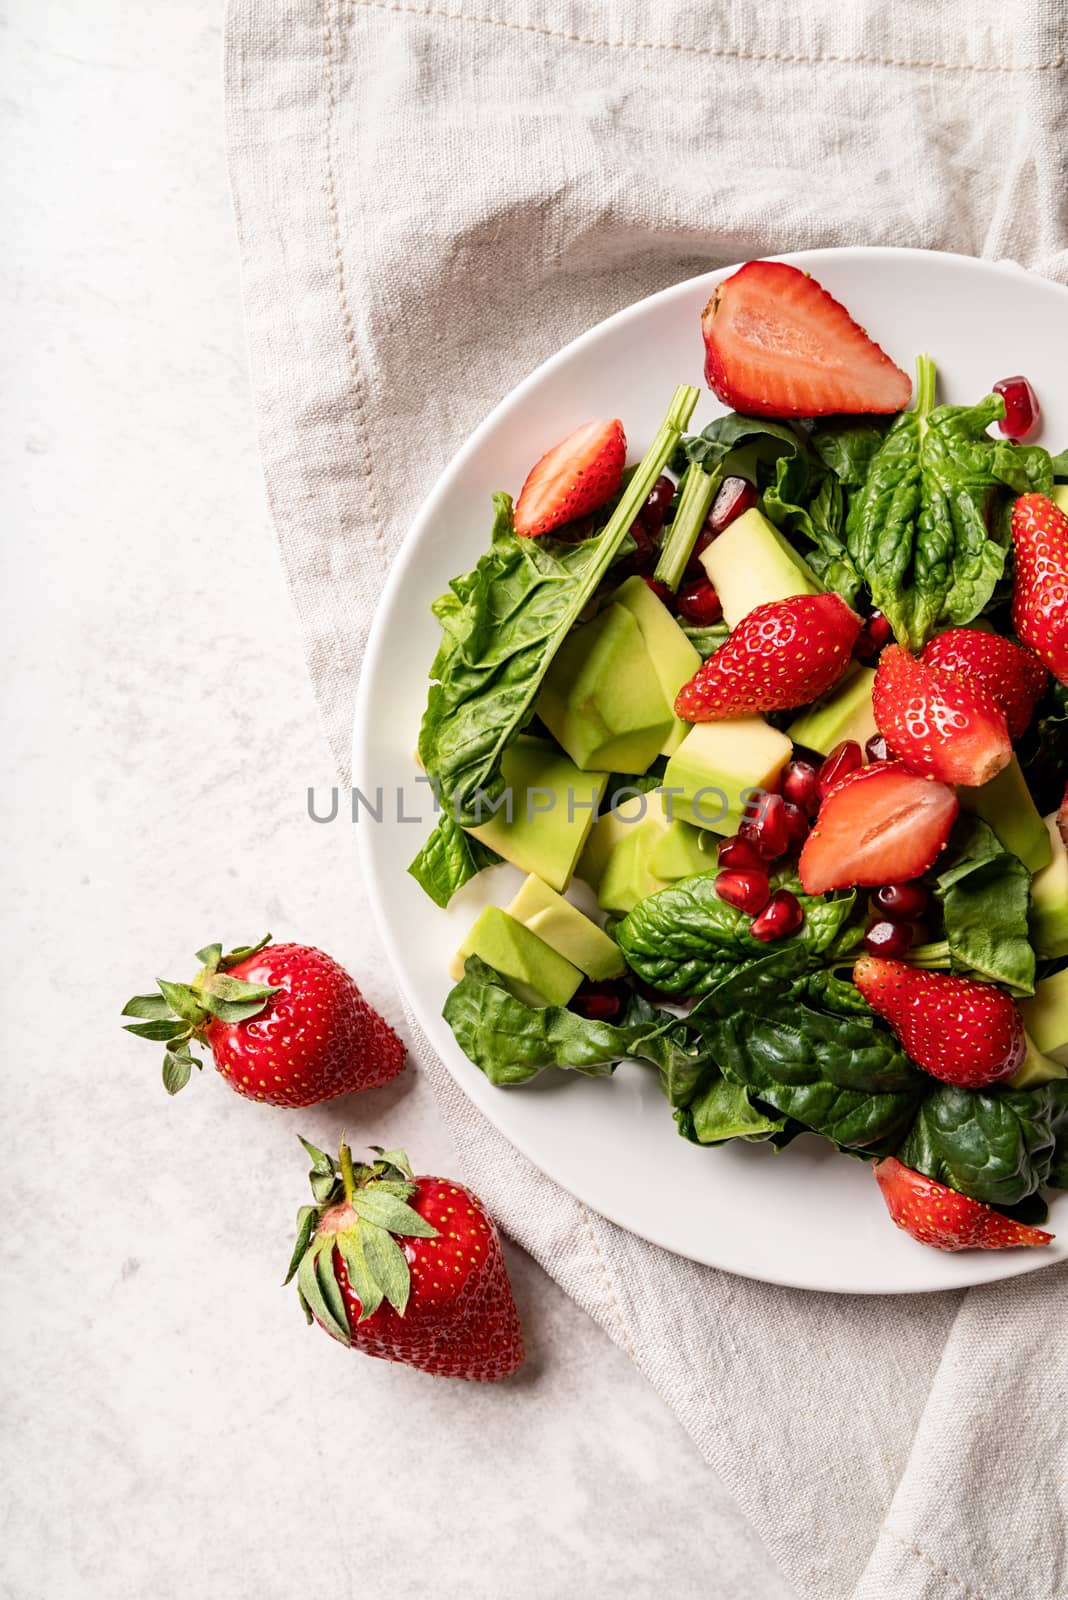 Healthy dieting. Ketogenic diet. Vegetarian food. Fresh salad with strawberries, avocado and spinach top view flat lay on white background